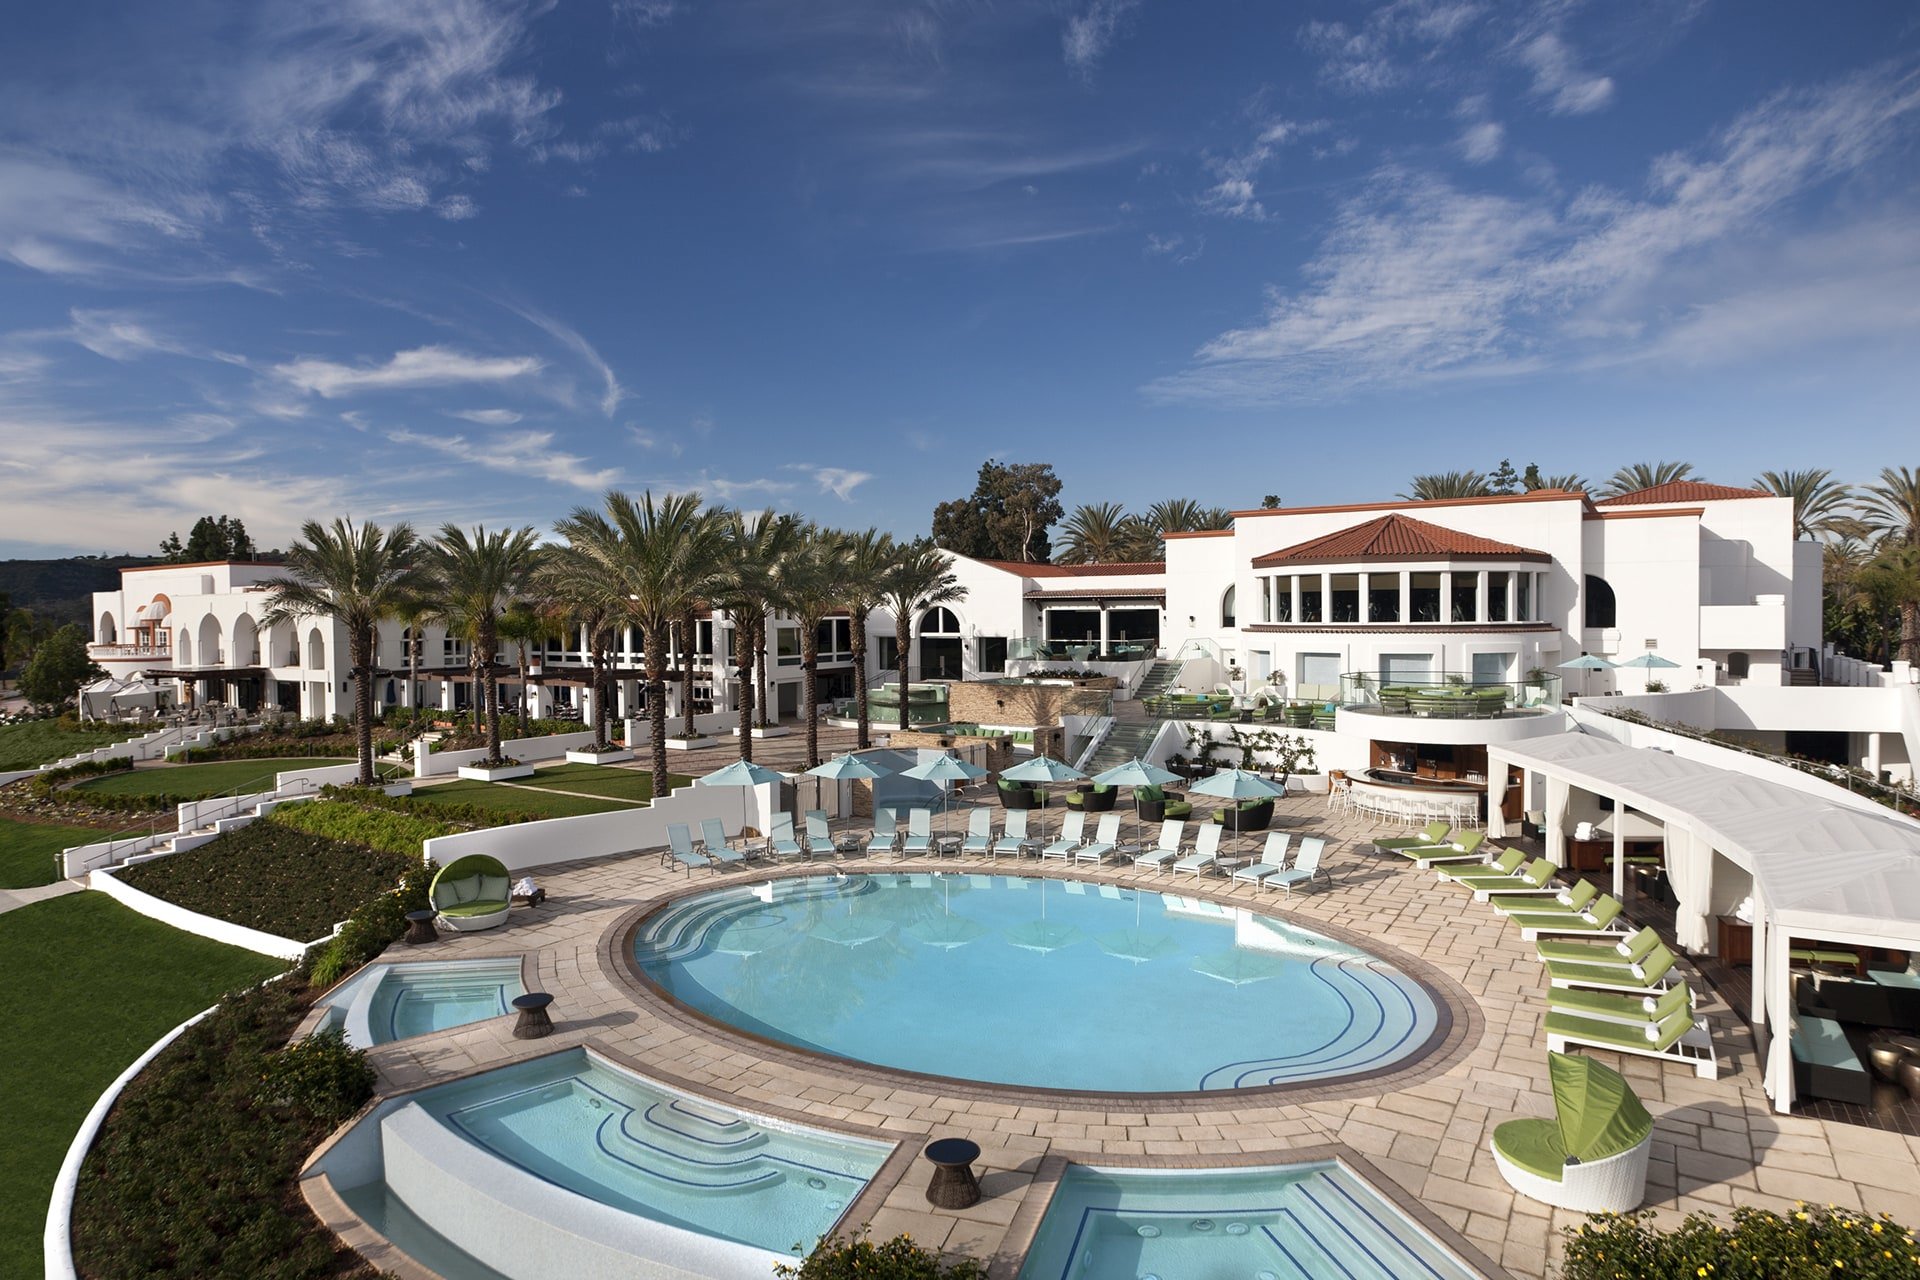 The Omni La Costa Resort and Spa’s $30K Family Holiday Package